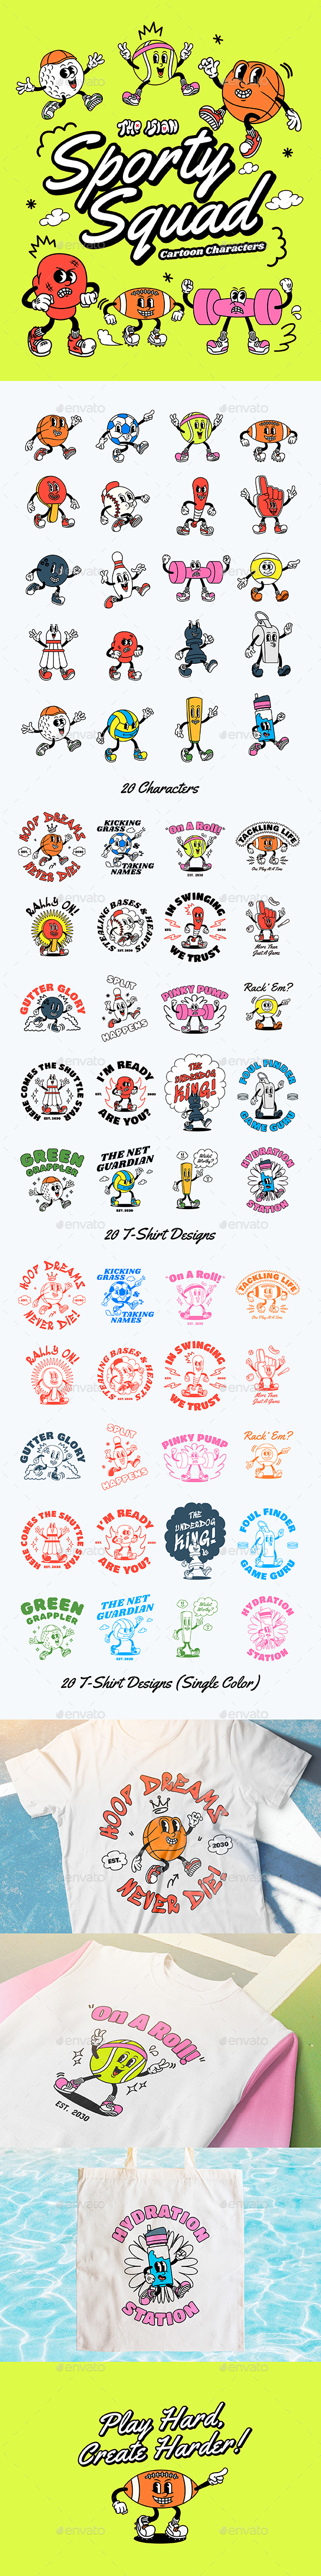 [DOWNLOAD]Sporty Squad Cartoon Characters